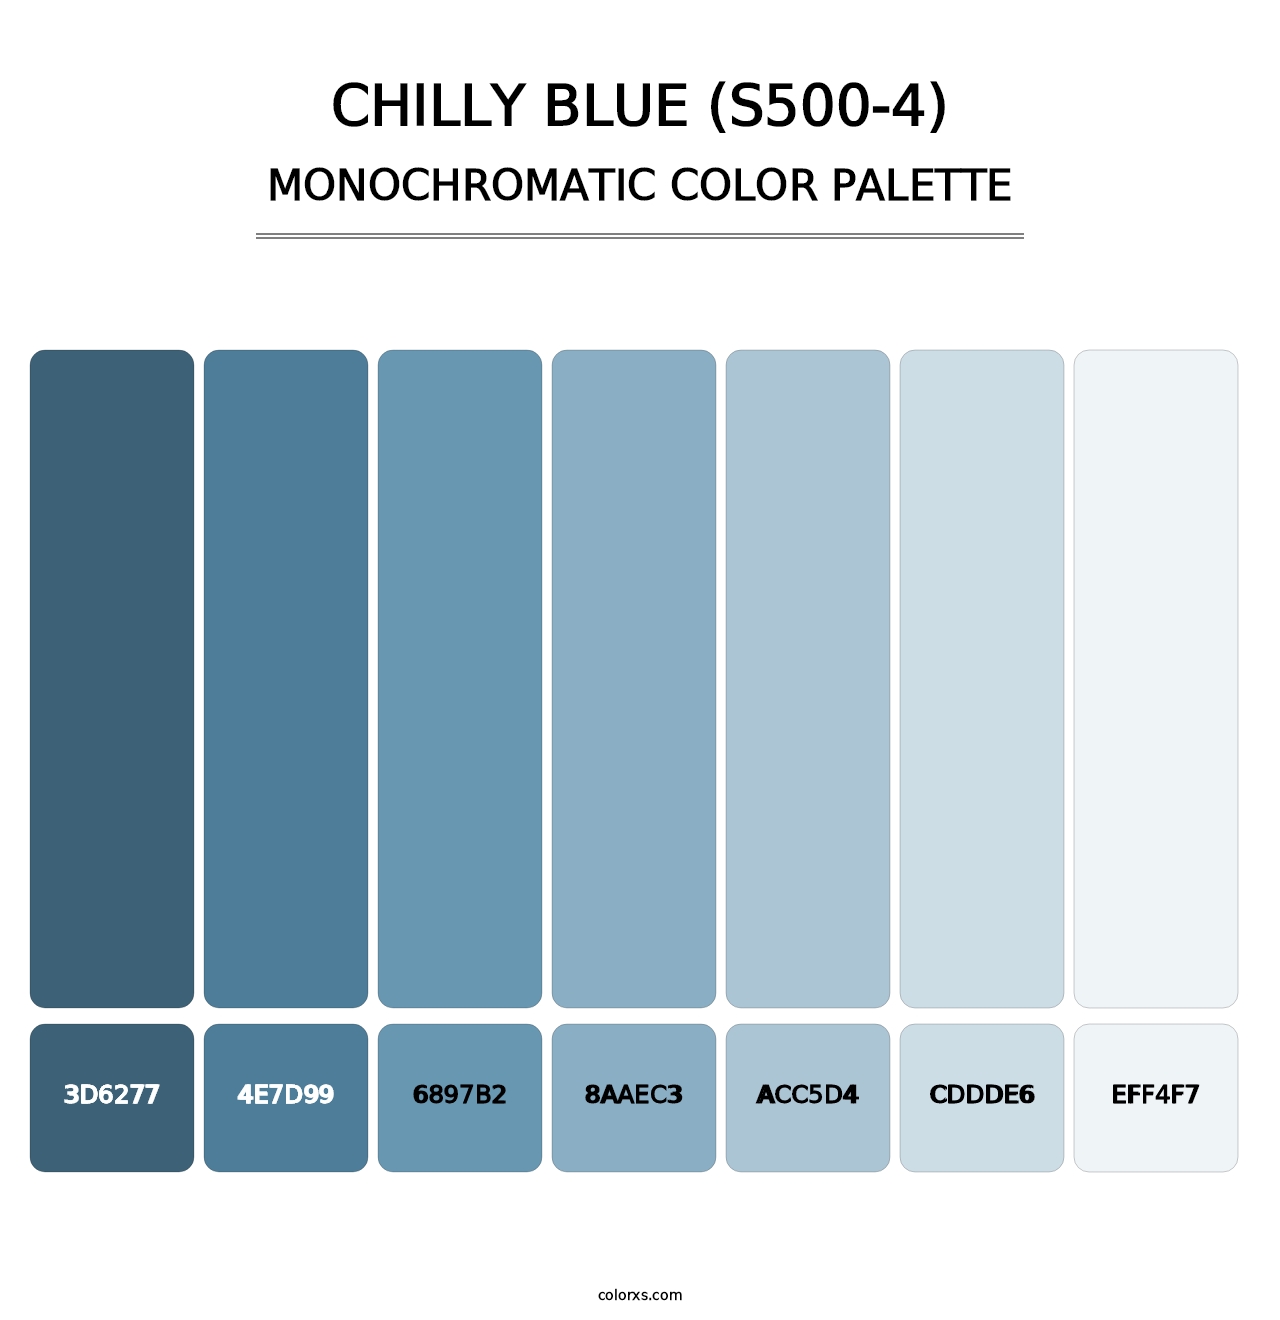 Chilly Blue (S500-4) - Monochromatic Color Palette